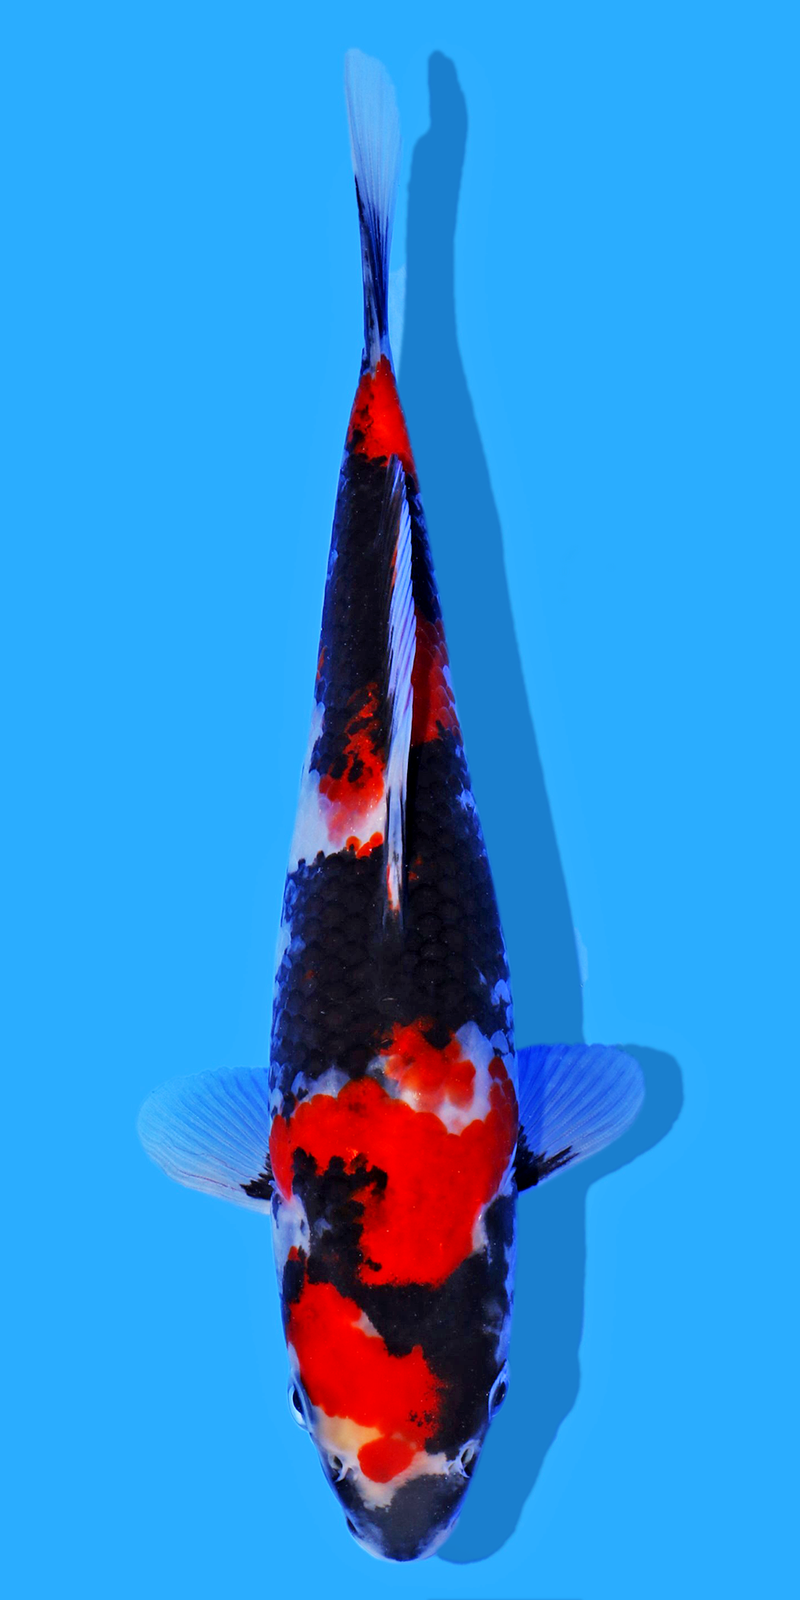 22cm Showa for the grow out event held by Ricky Stoddart at Koi Wholesale.